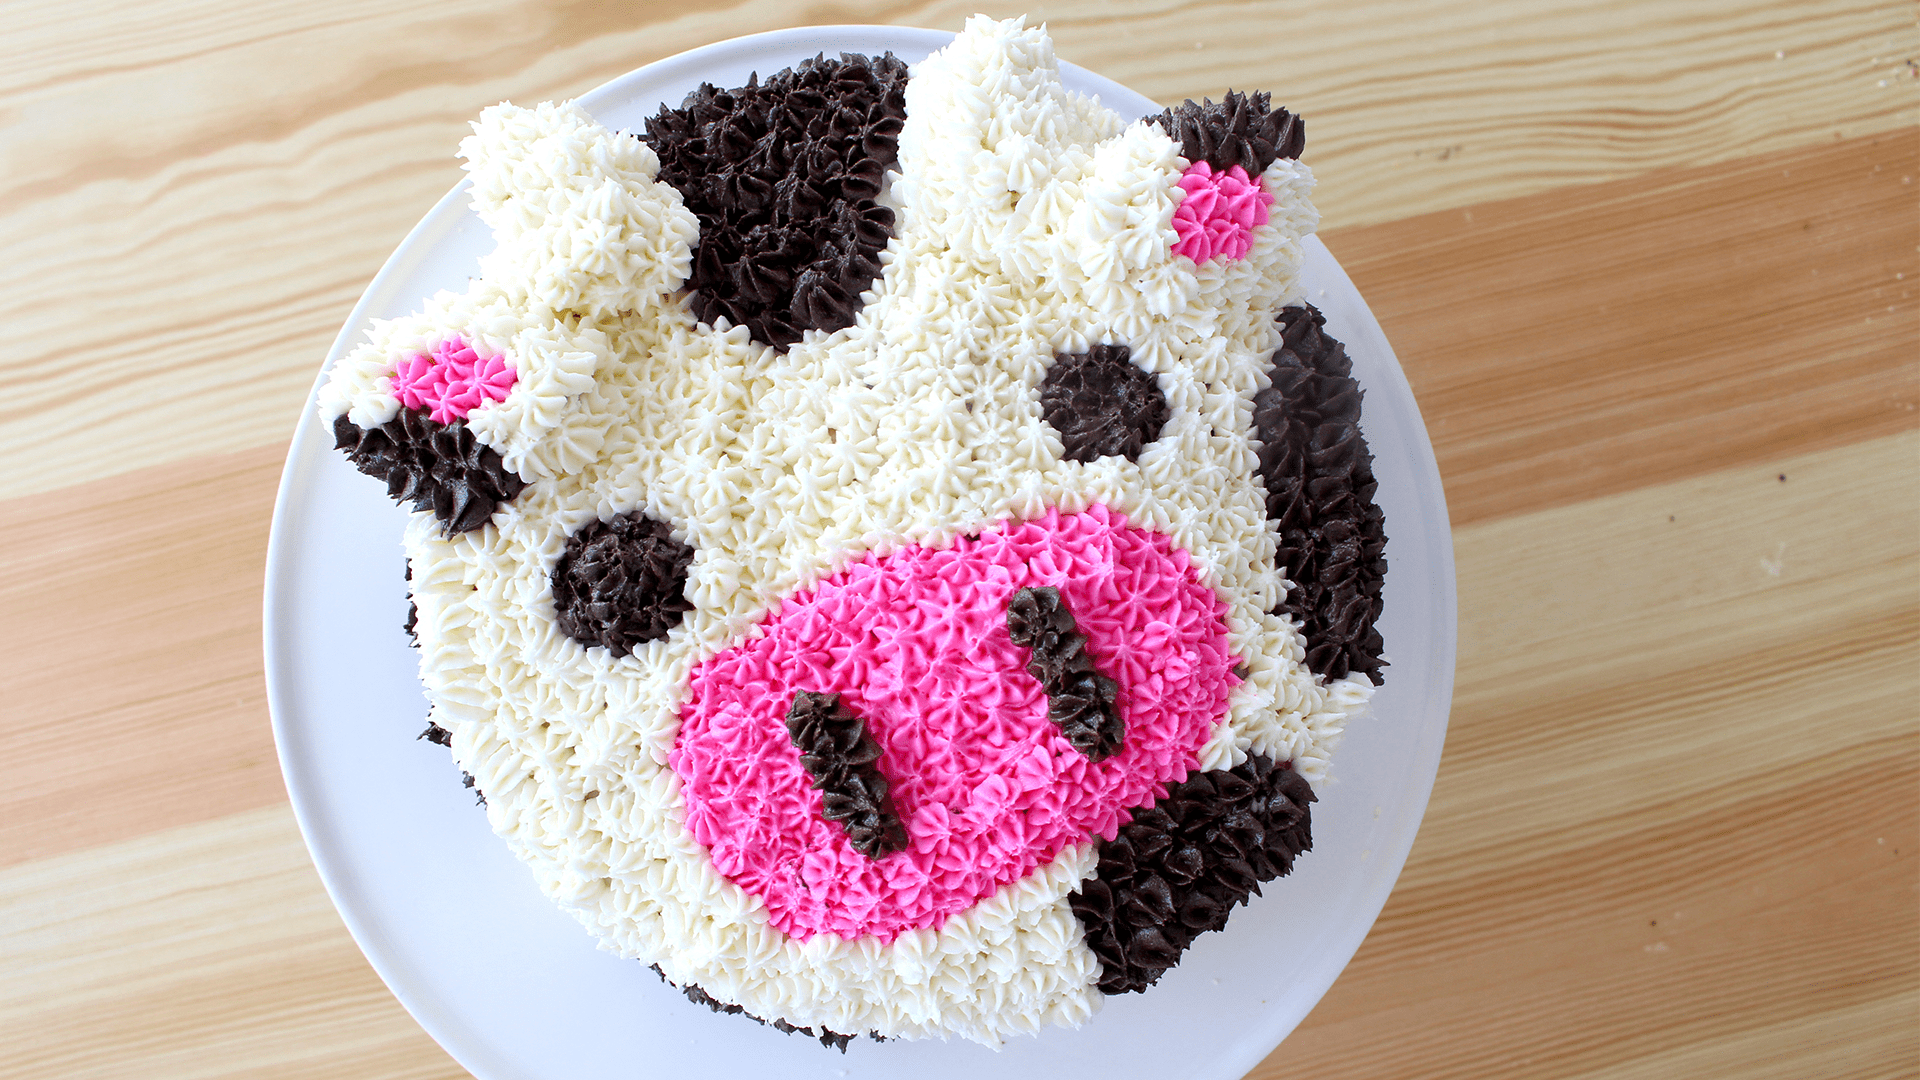 Cow Birthday Cake Ideas Images (Pictures)